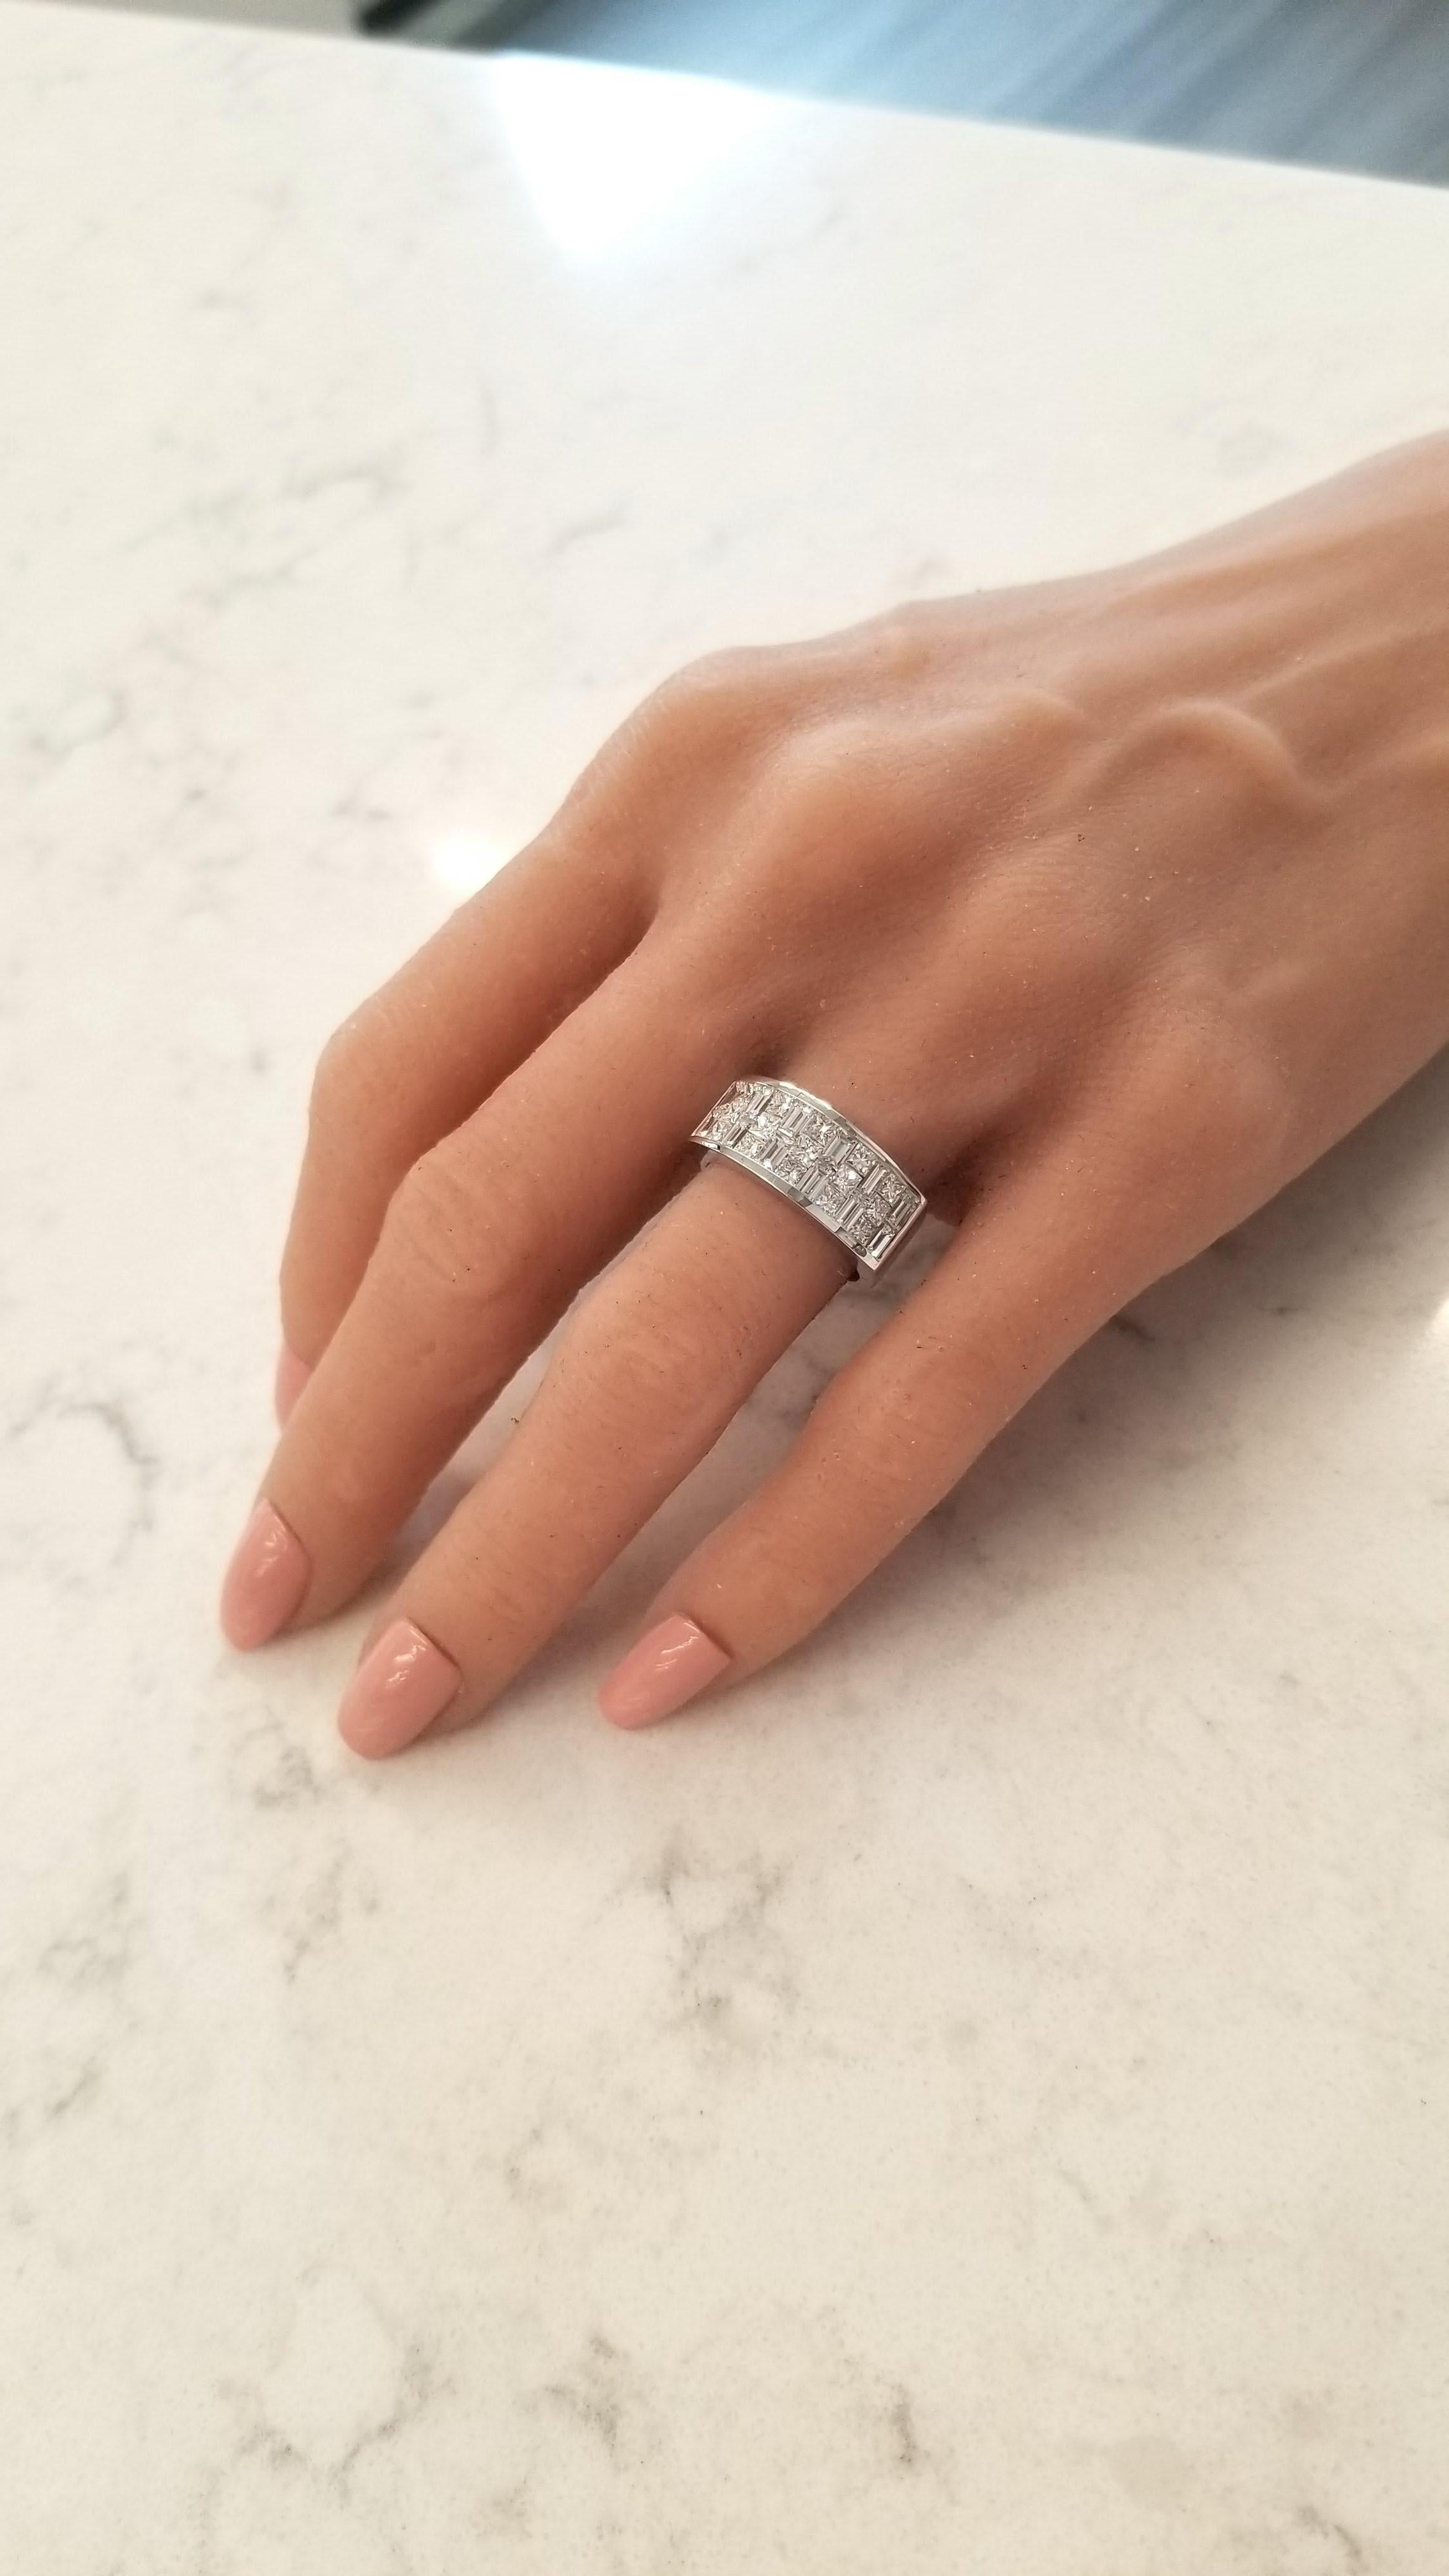 Expertly invisibly channel-set diamonds adorn this striking three-quarter eternity band, alternating between princess cut and shimmering baguette cut, arranged in a spectacular basket grid repeating pattern totaling 2.05 carats. Created in brightly